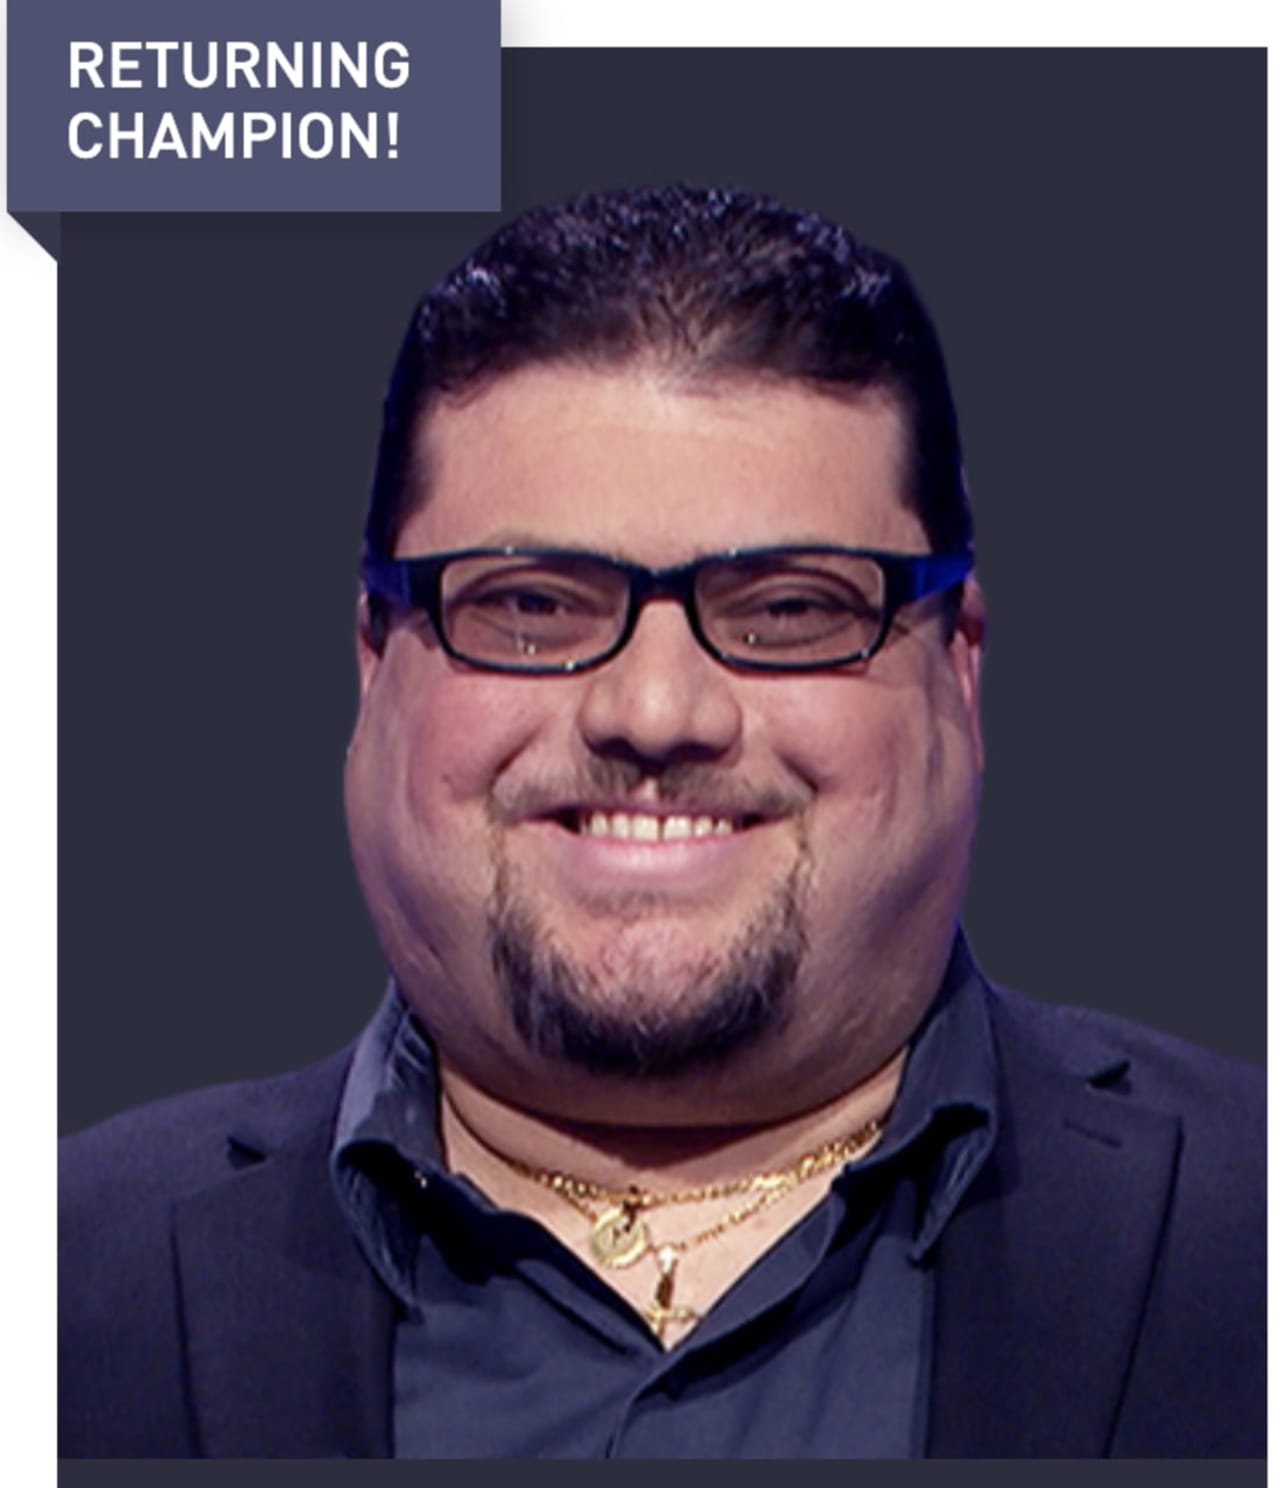 Pasquale Palumbo made it through his first round on 'Jeopardy!' and will appear again on Friday.